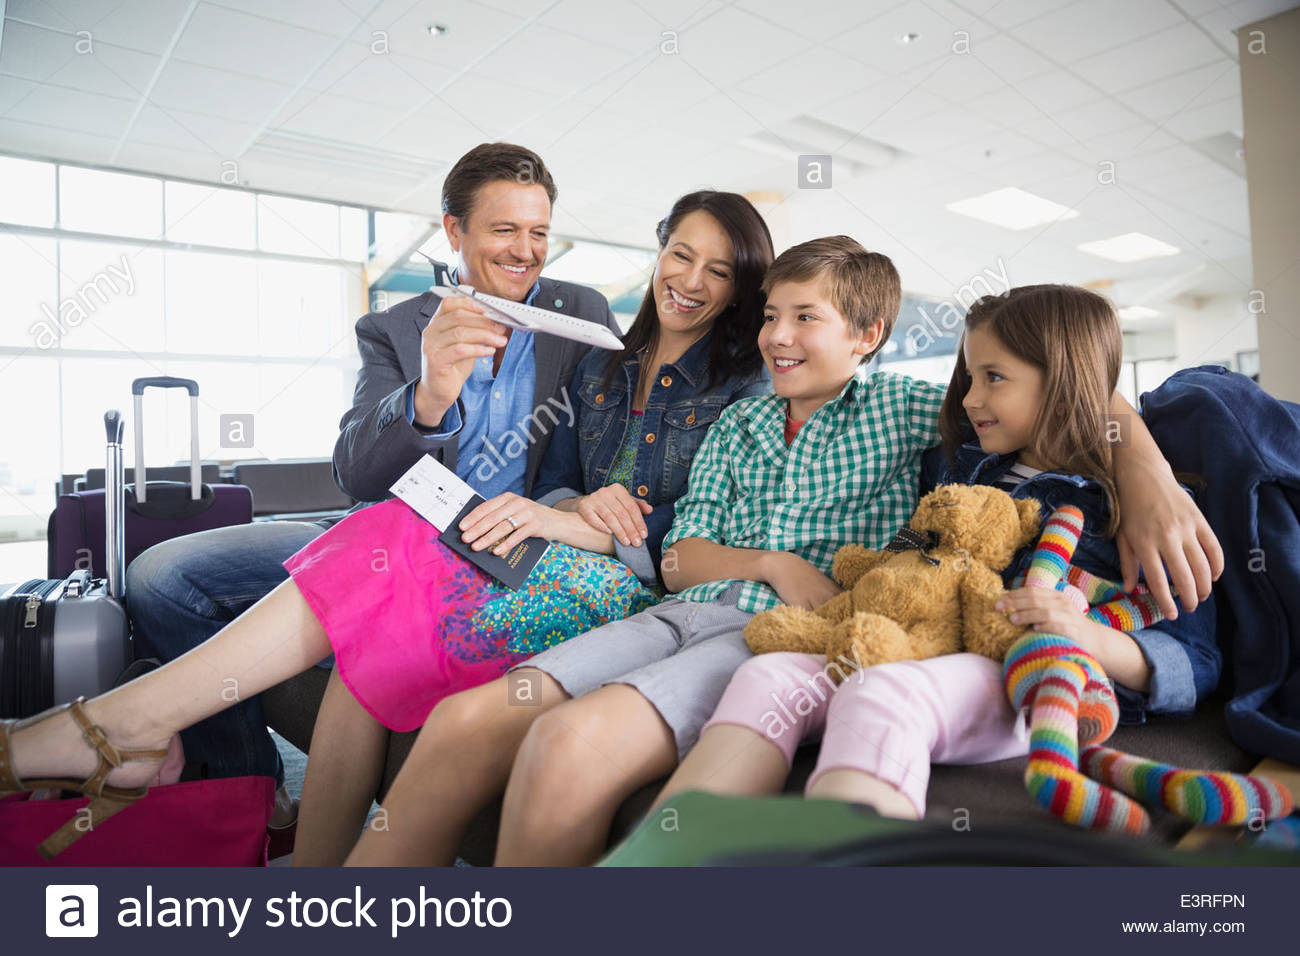 Family with toy airplane waiting in airport Stock Photo